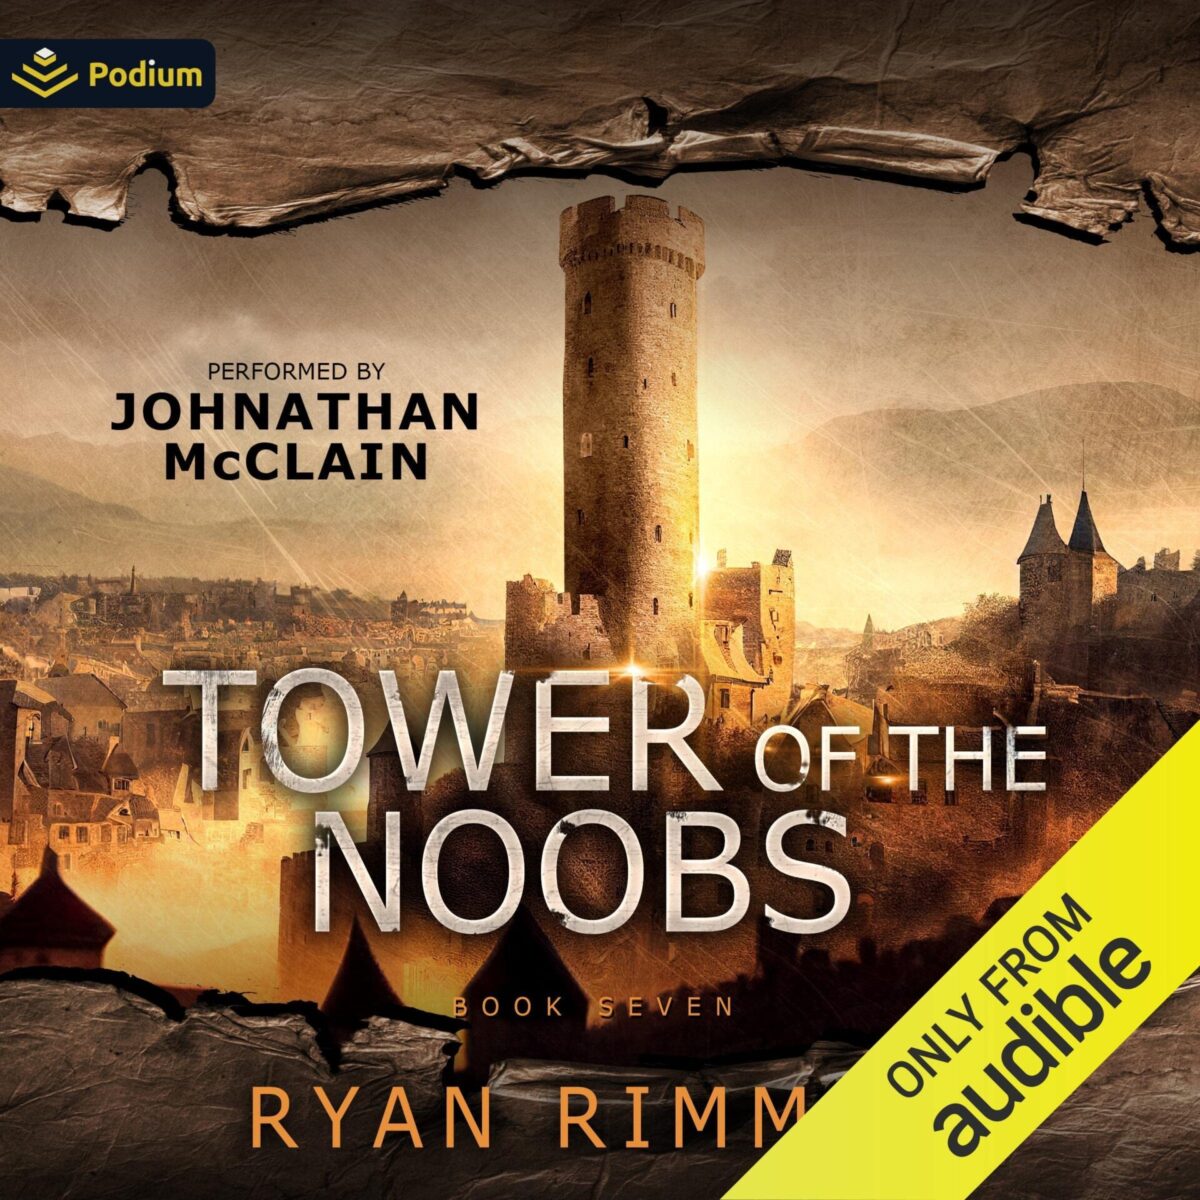 Tower of the Noobs – The Audiobook Review